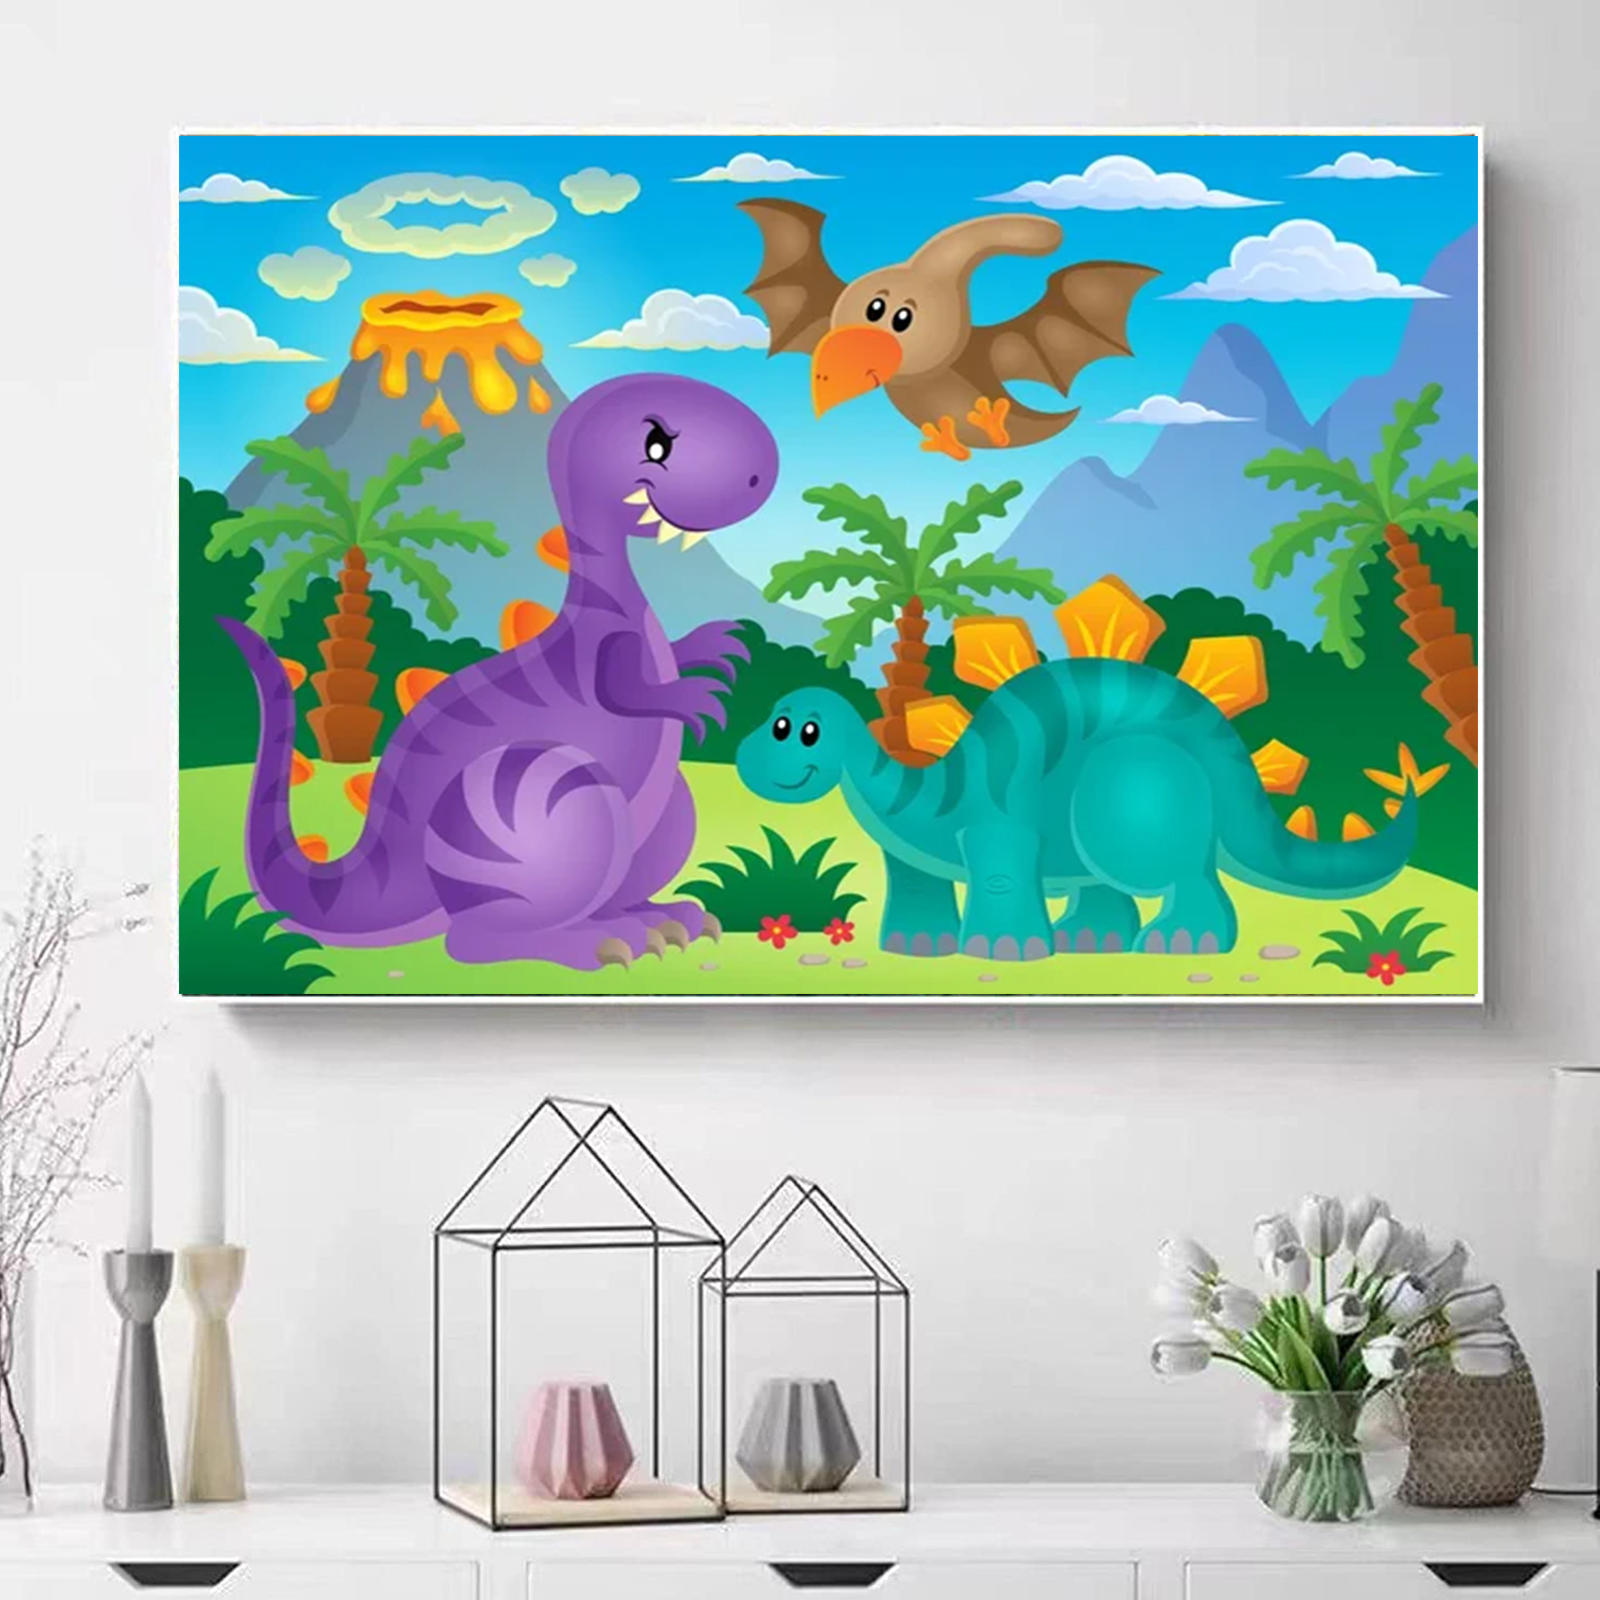 DIY Diamond Painting Kits for Adults, Good Little Dinosaur Round Full Drill  5D DIY Diamond Painting Art Kits for Home Decoration and Room Wall Decor